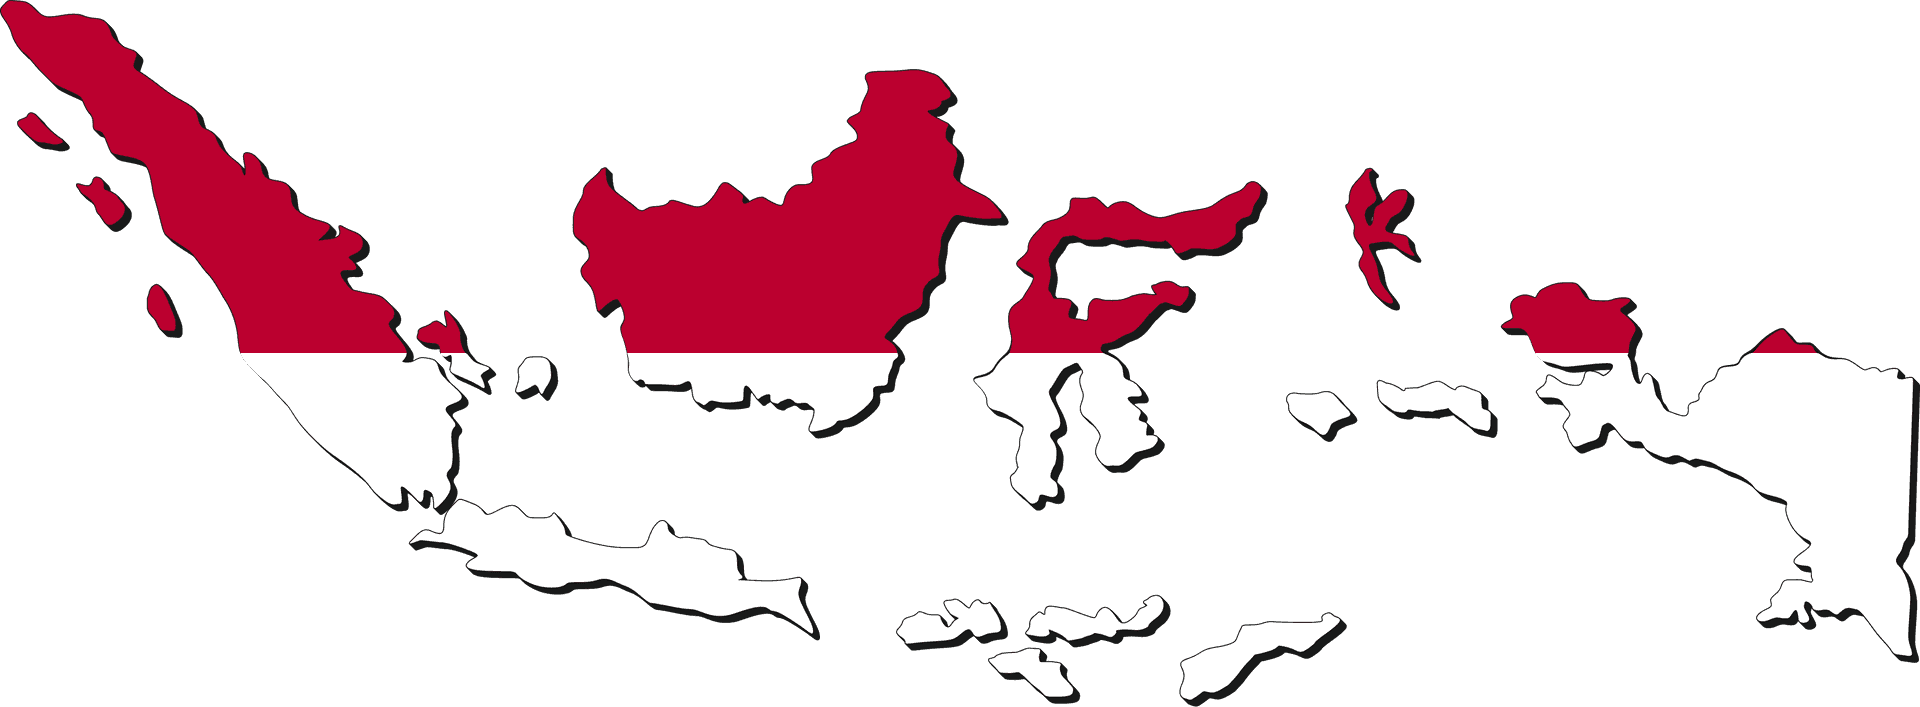 Download Indonesia Flag Map Silhouette | Wallpapers.com